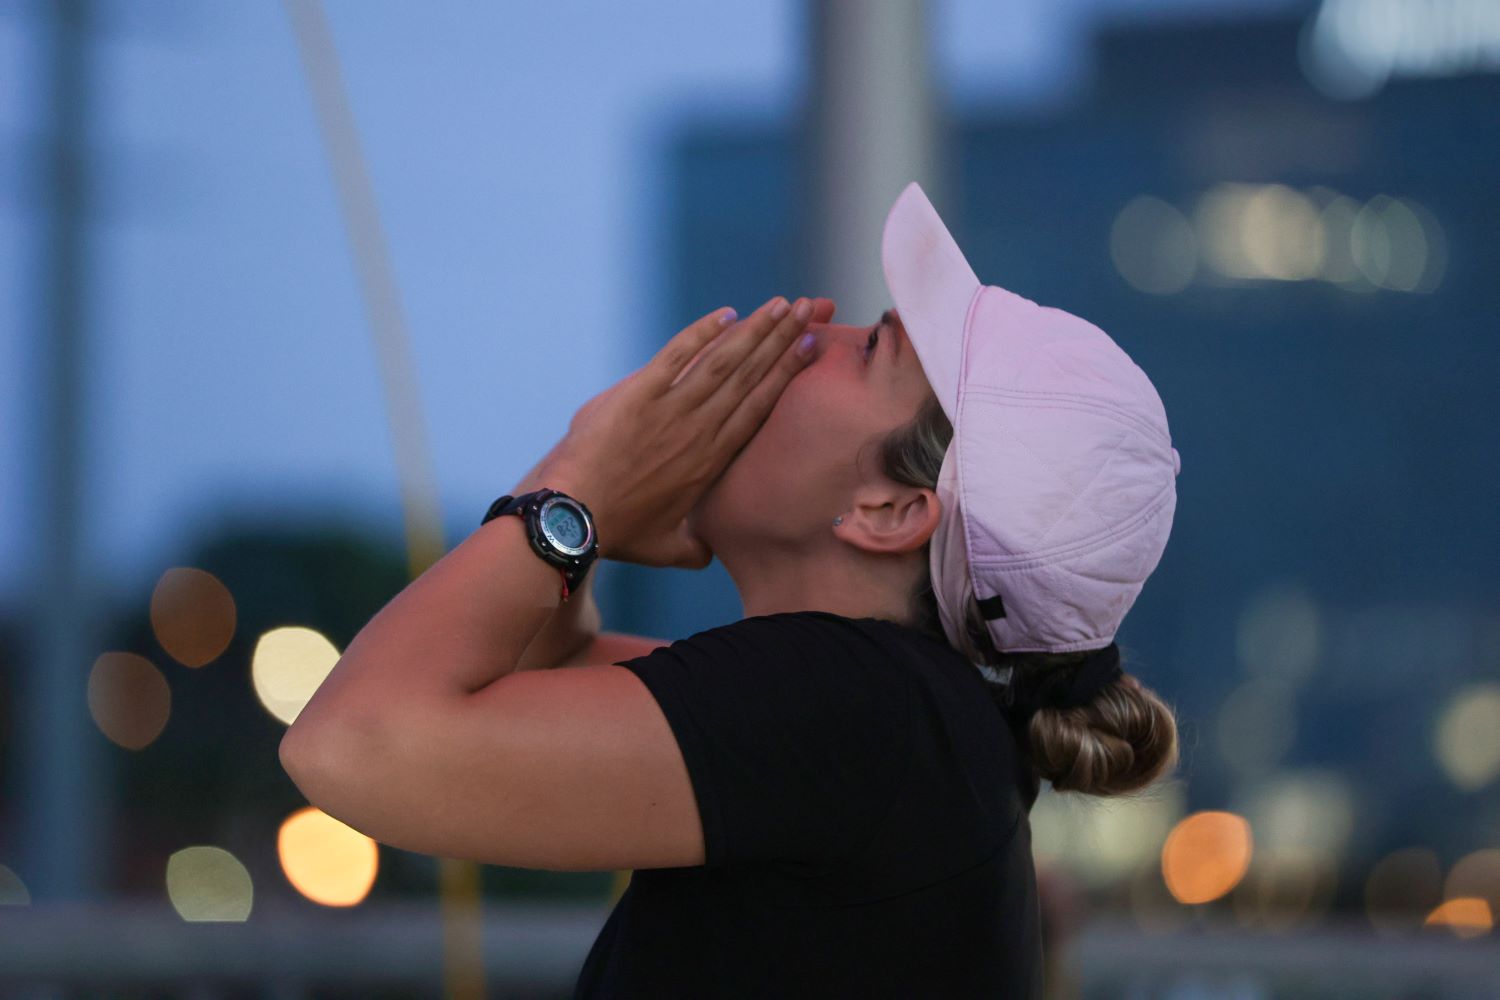 Claire Rehfuss, the winner of 'The Amazing Race 34' on CBS, wears a black shirt and light pink baseball cap during the final leg while calling up to her partner Derek Xiao.